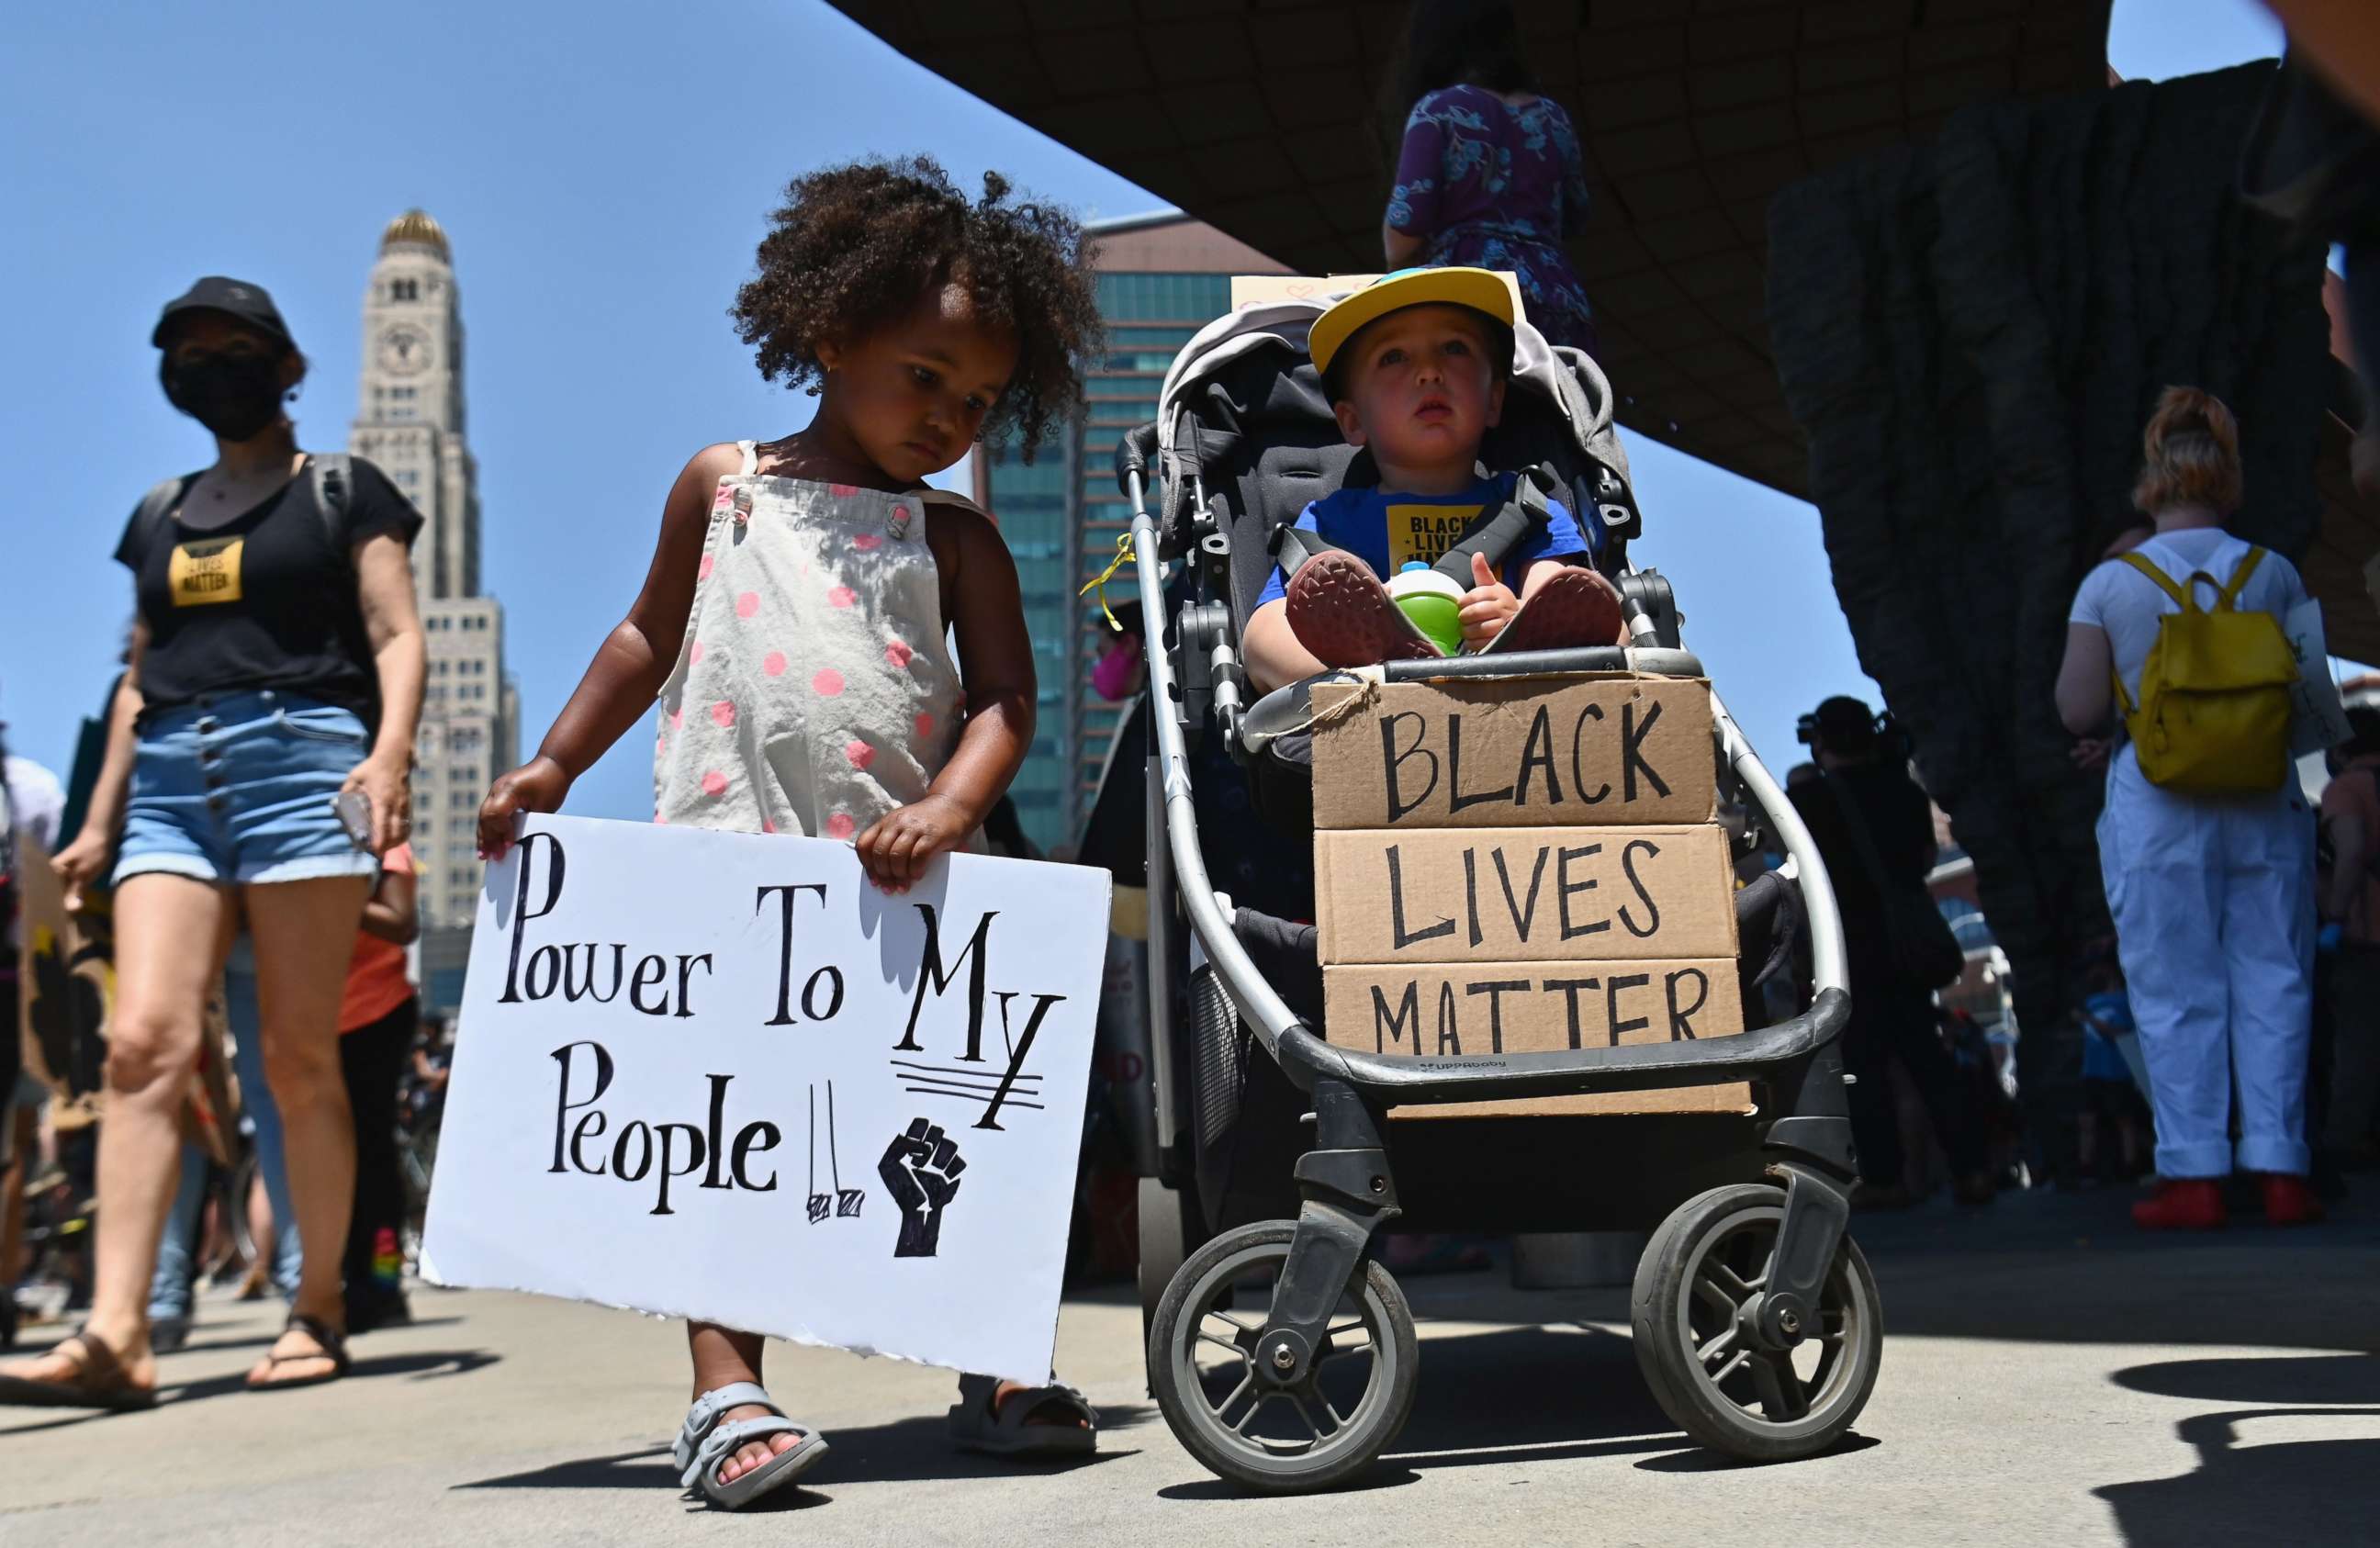 PHOTO: Families participate in a children's march in solidarity with the Black Lives Matter movement and national protests against police brutality on June 9, 2020 in the Brooklyn Borough of New York City.